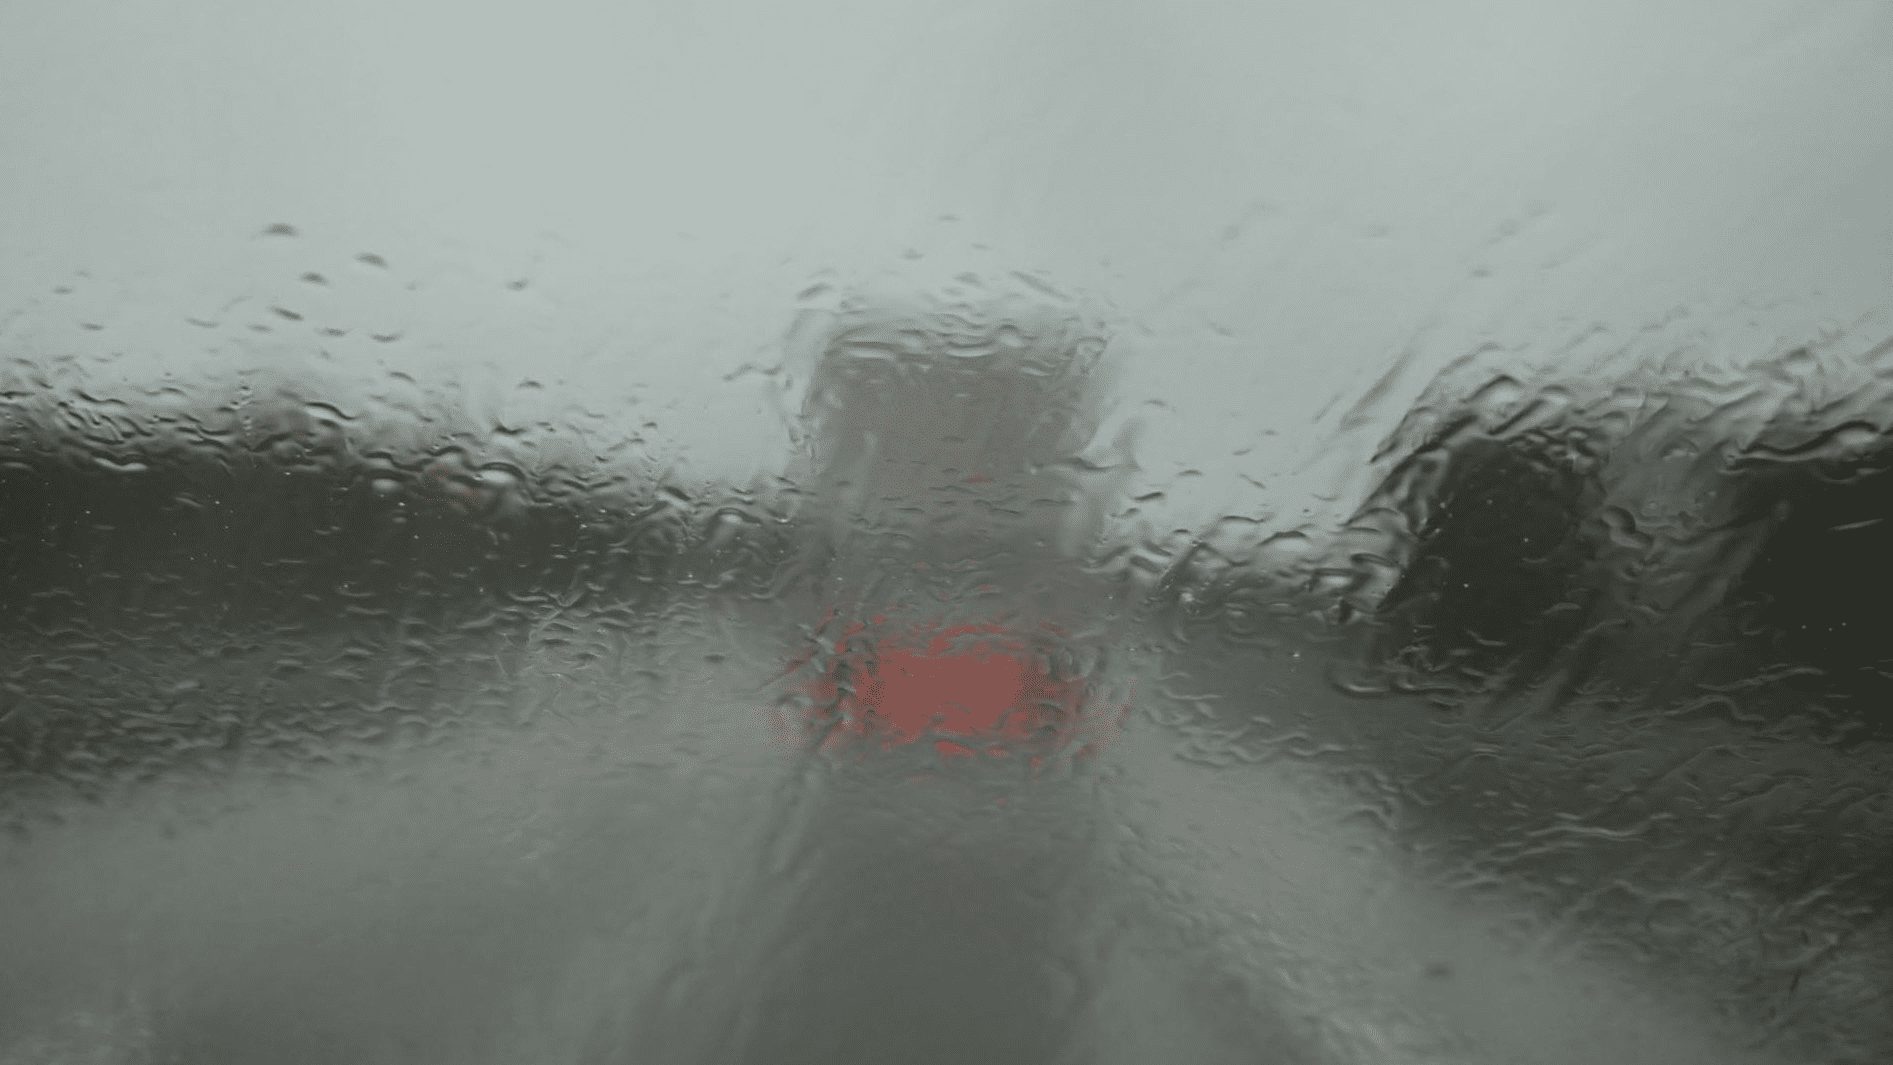 Driving behind a truck on slippery road while raining